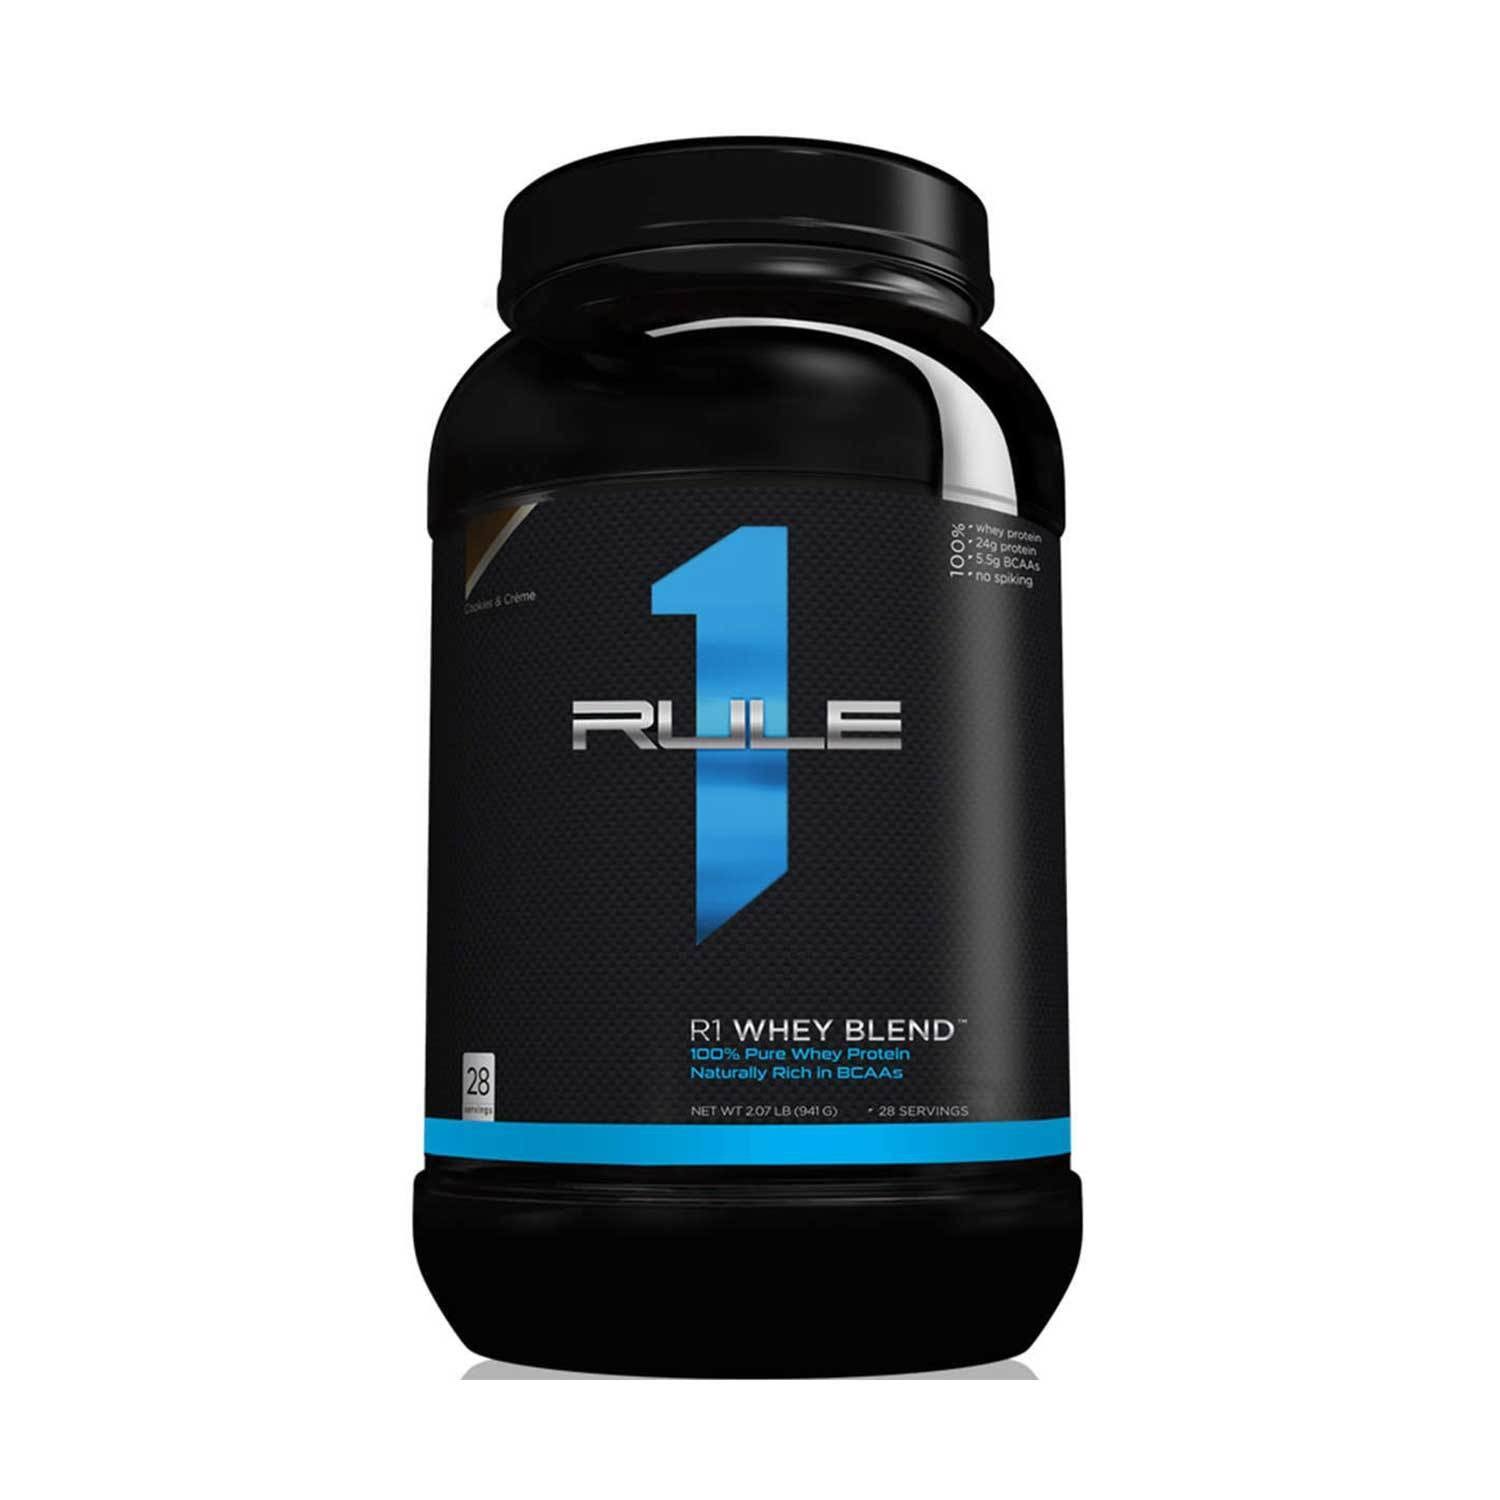 R1 Whey Blend 2lb, Chocolate Peanut Butter